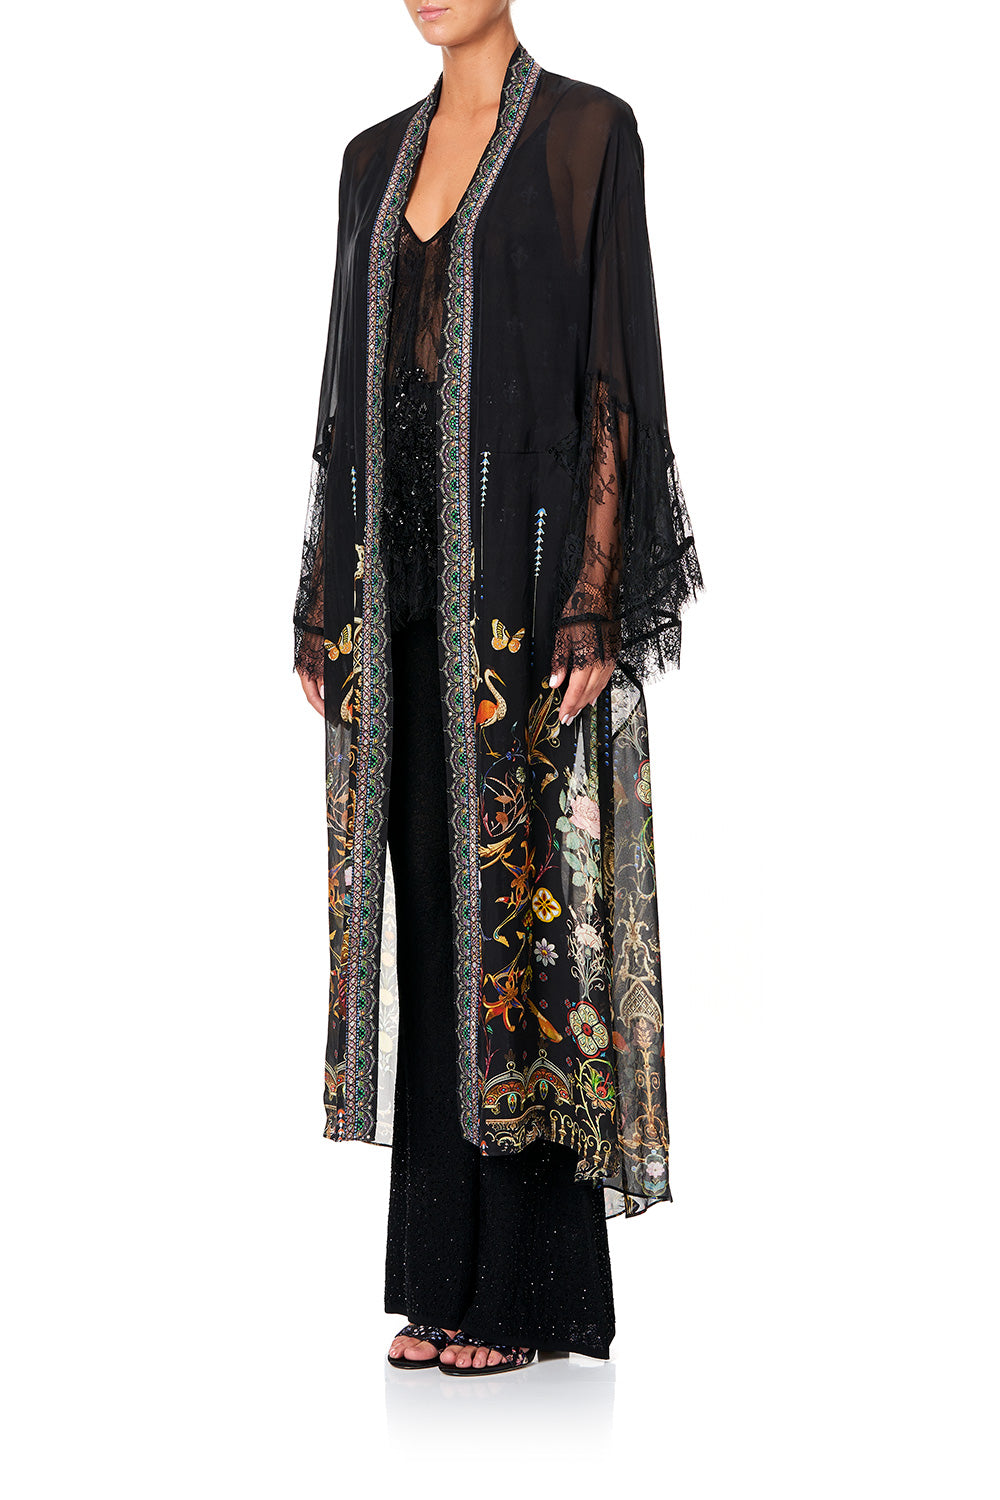 CAMILLA LAYERING ROBE WITH LACE INSERT REBELLE REBELLE